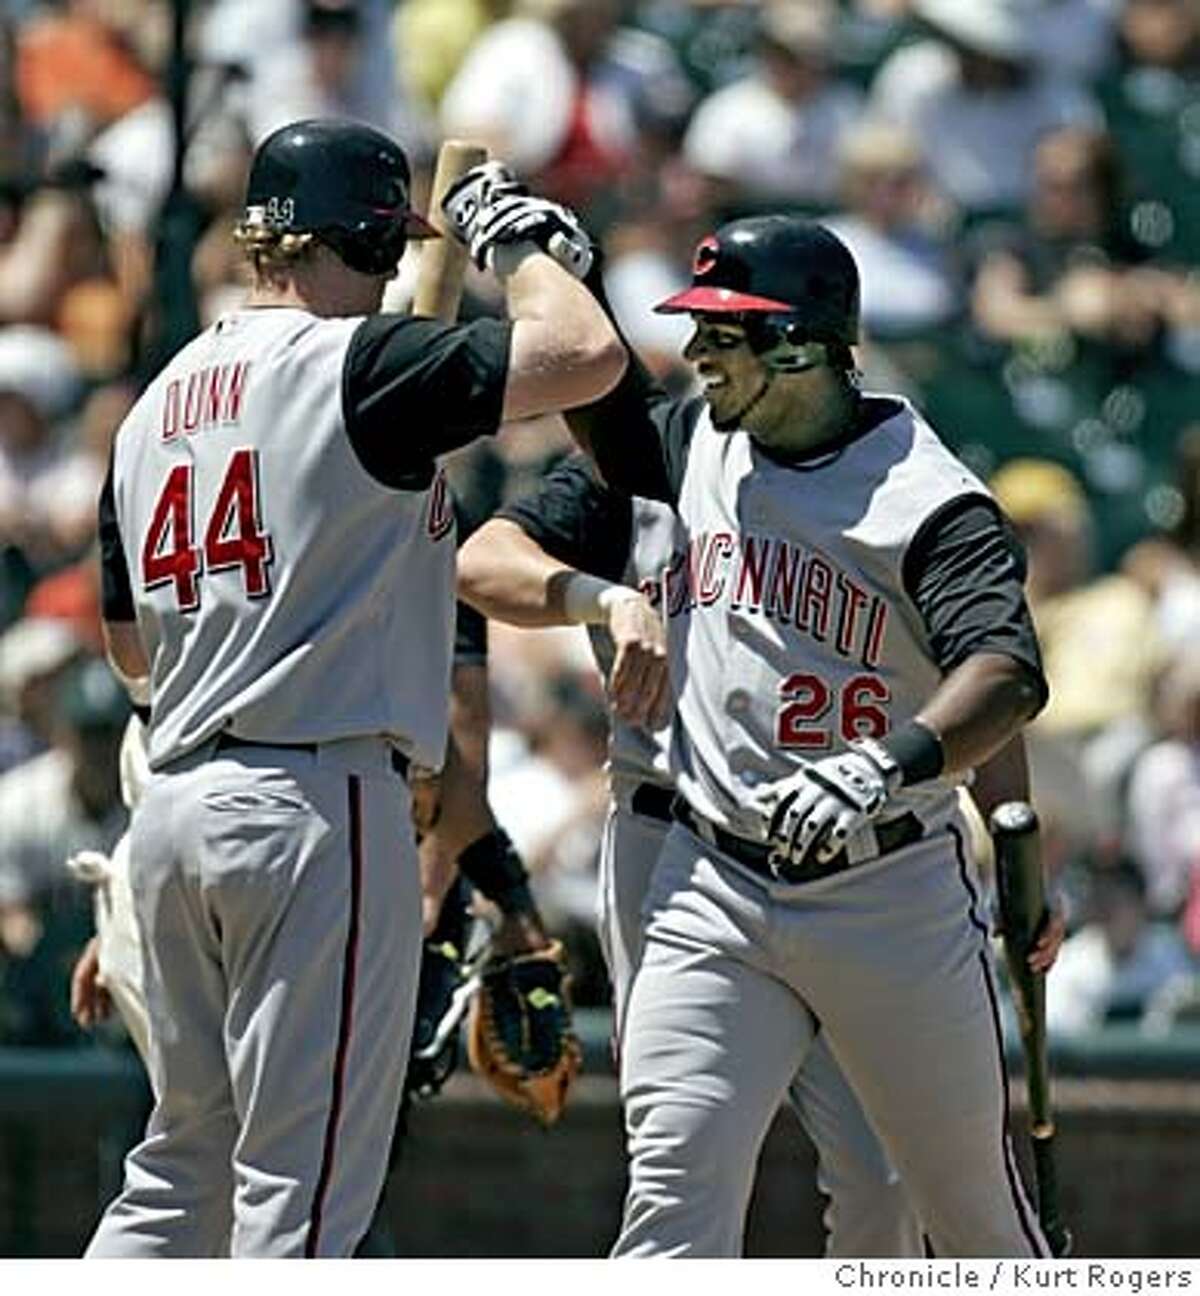 Jason LaRue comes in after his three run homer in the 3rd Cincinnati Reds vs the San Francisco Giants. GIANTS_0229_kr.JPG 7/4/05 in San Francisco,CA. KURT ROGERS/THE CHRONICLE MANDATORY CREDIT FOR PHOTOG AND SF CHRONICLE/ -MAGS OUT